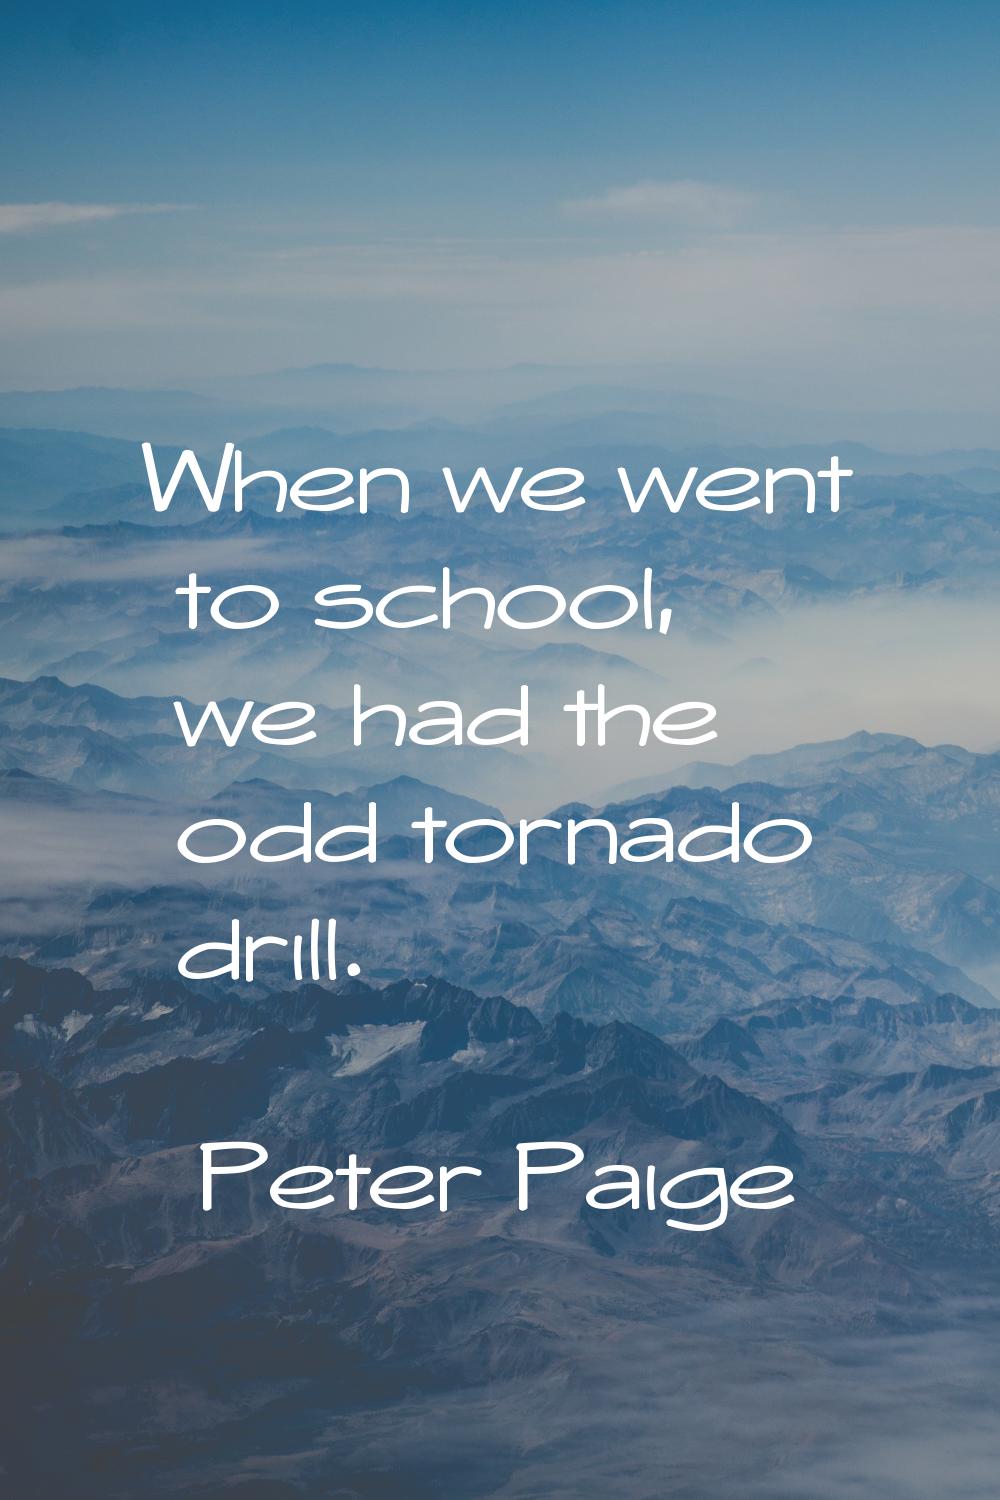 When we went to school, we had the odd tornado drill.